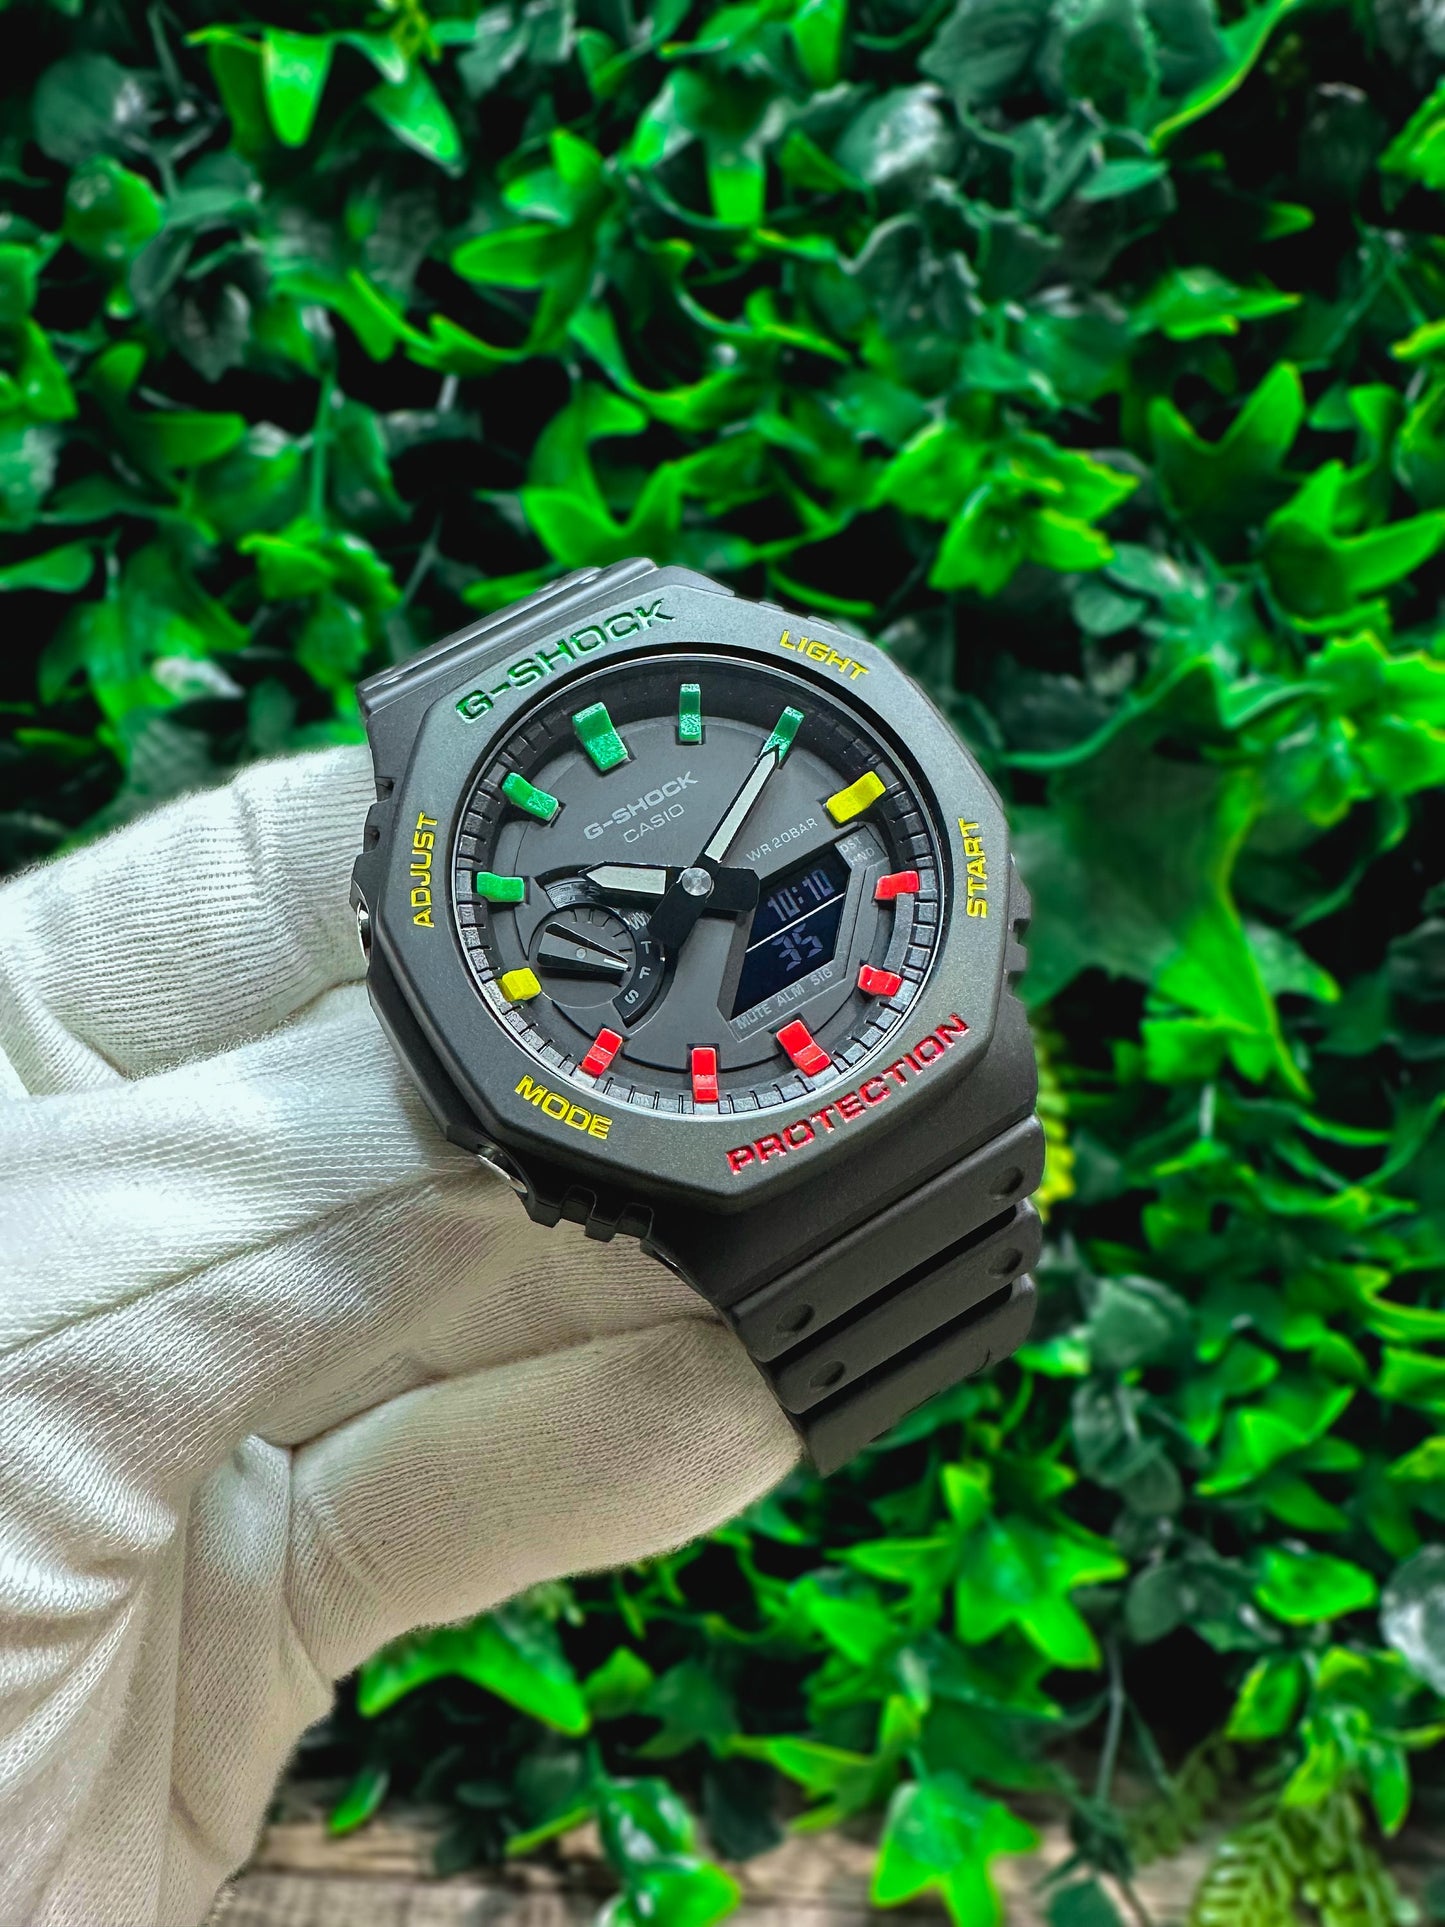 G-Shock CasiOak "Rasta" - Red/Green/Yellow Hand Painted Genuine Casio GA2100 - Carbon Core Protection - Optional Sapphire Crystal